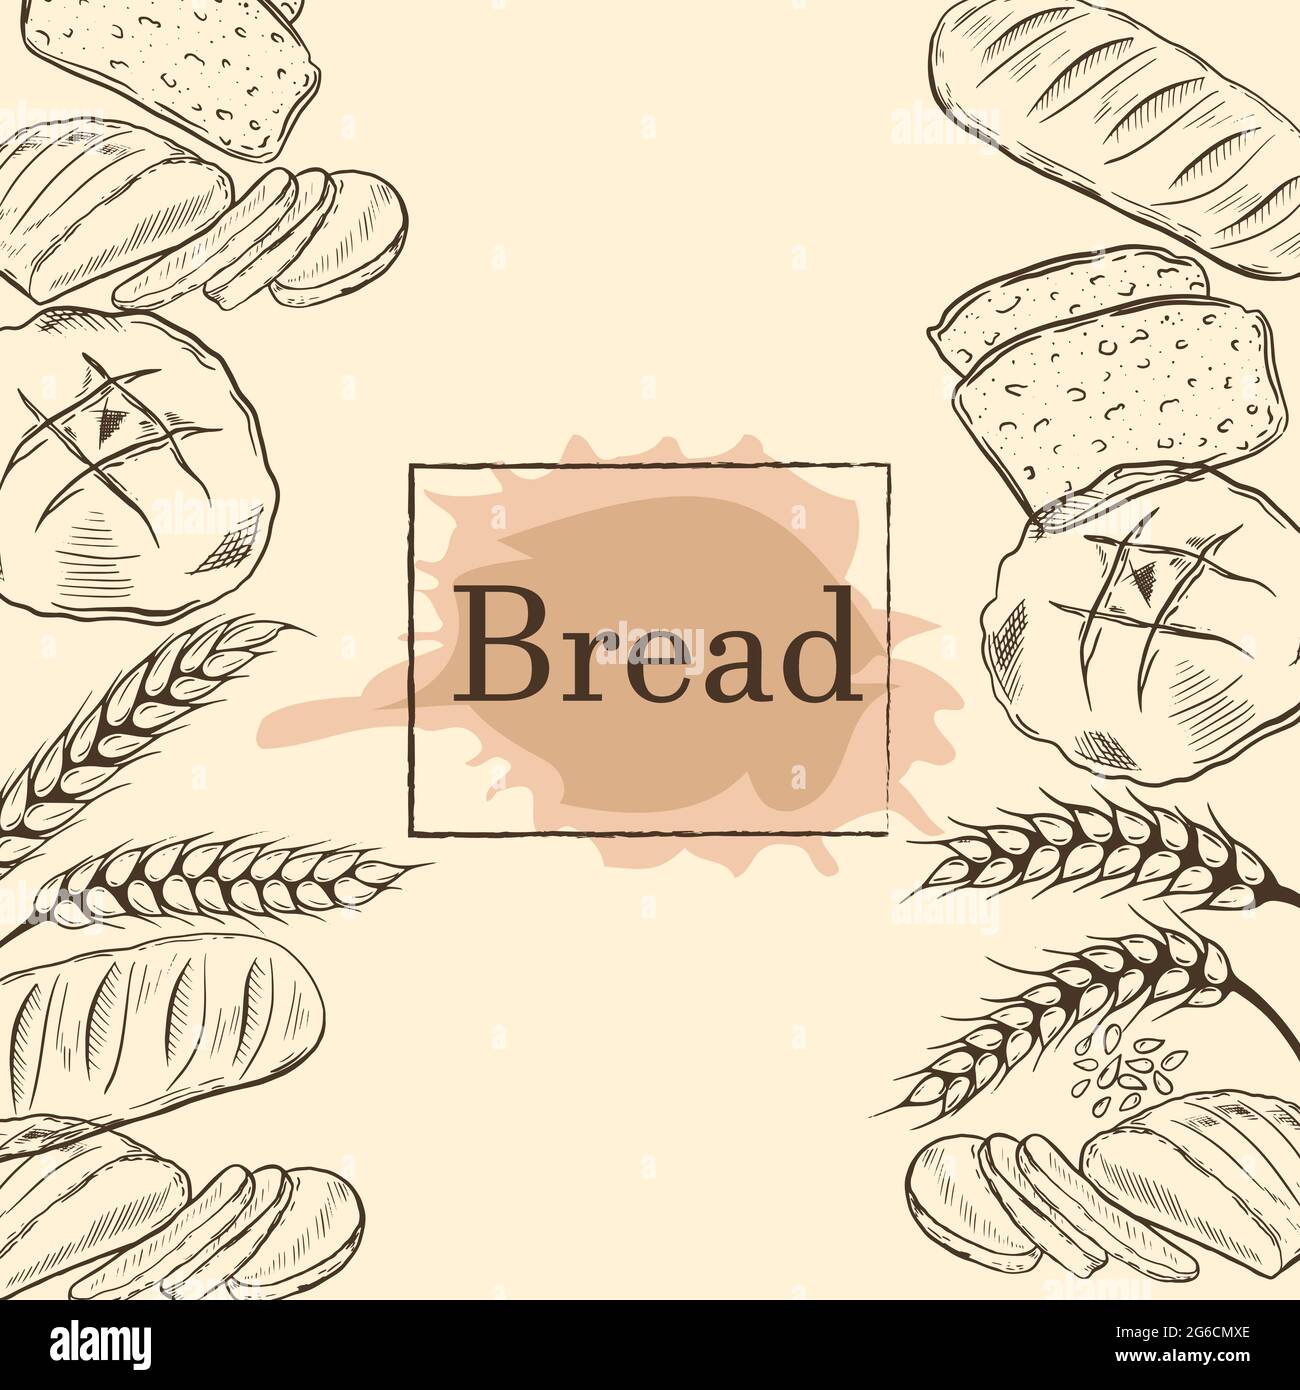 Background with loaves of bread and spikelets of grains, vector illustration. Frame, baked goods, vintage style. Hand drawing. Stock Vector